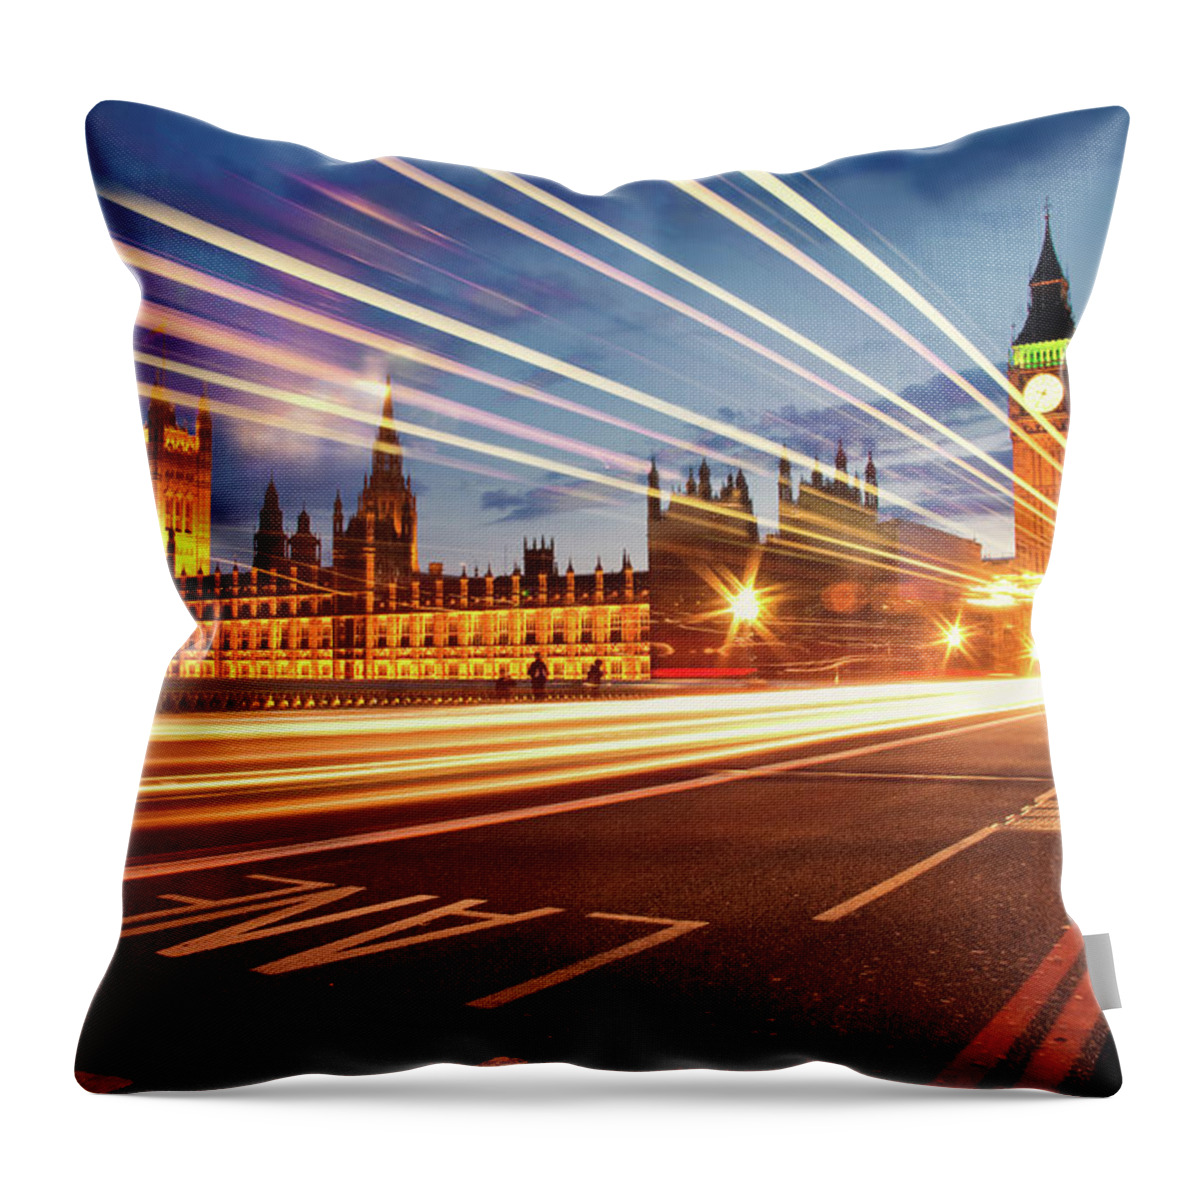 Clock Tower Throw Pillow featuring the photograph Big Ben And The Houses Of Parliament by Stuart Stevenson Photography